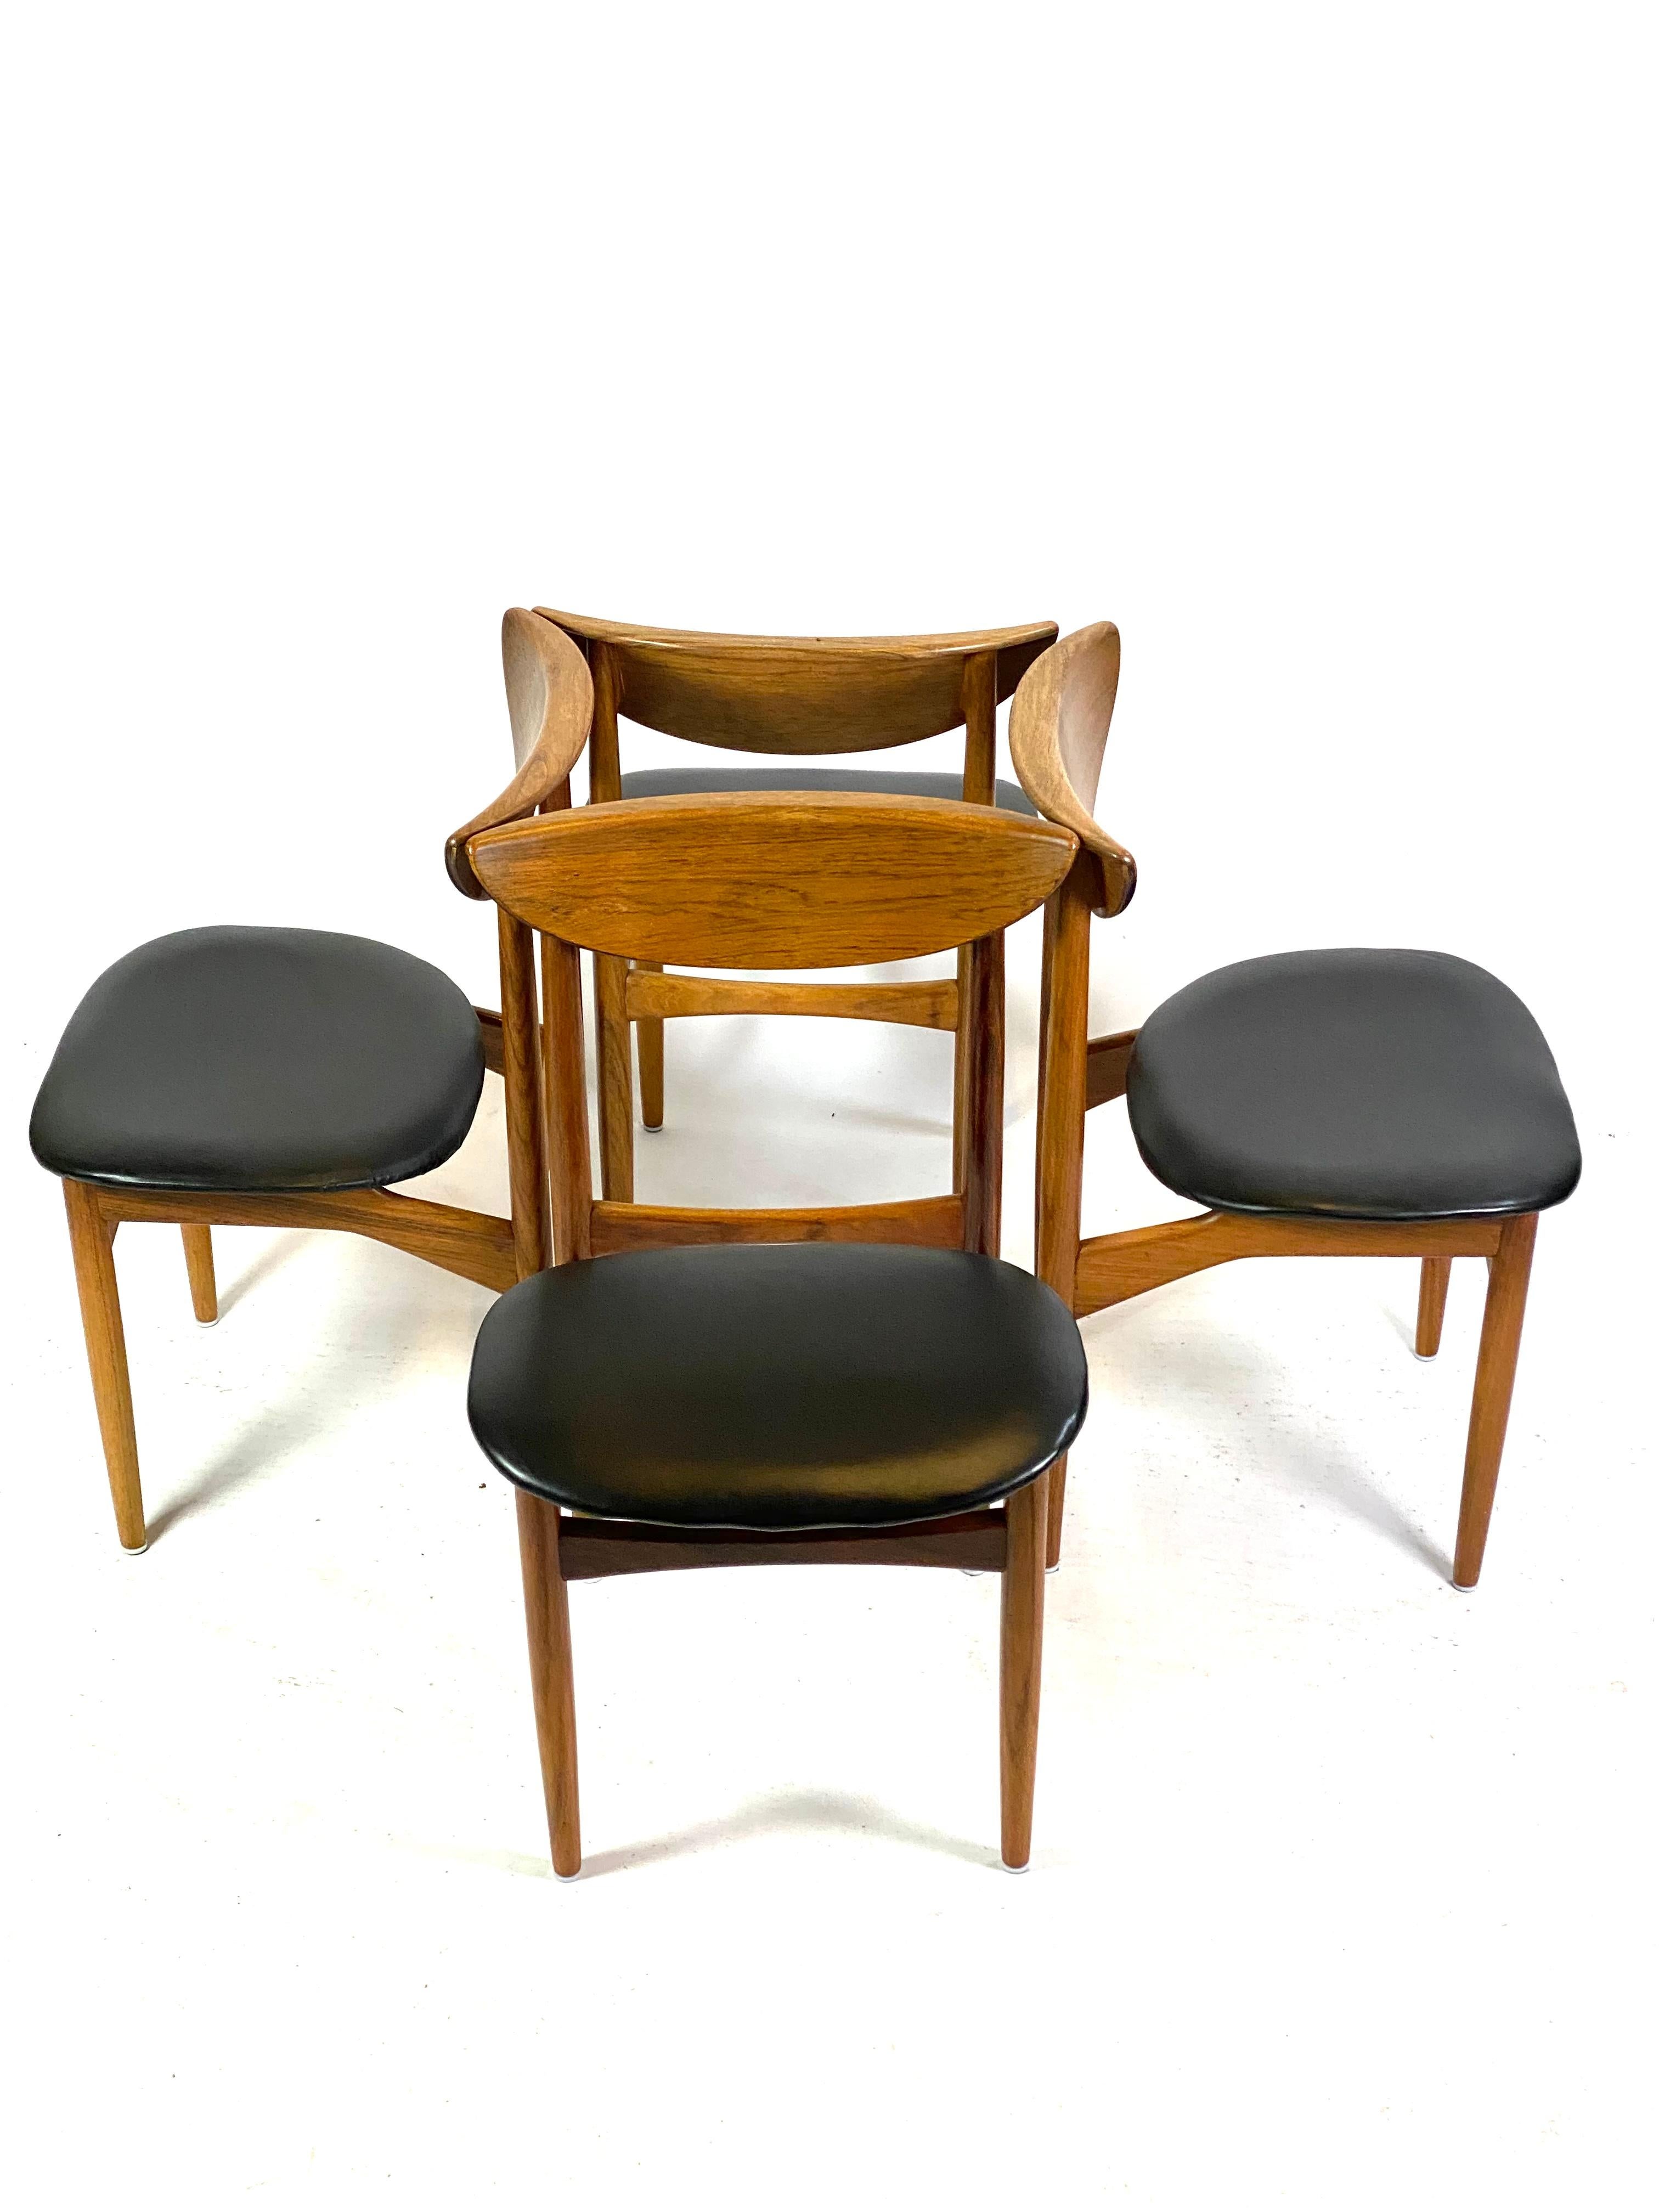 Mid-20th Century Scandinavian Modern Four Dining Room Chairs in Rosewood of Danish Design, 1960s